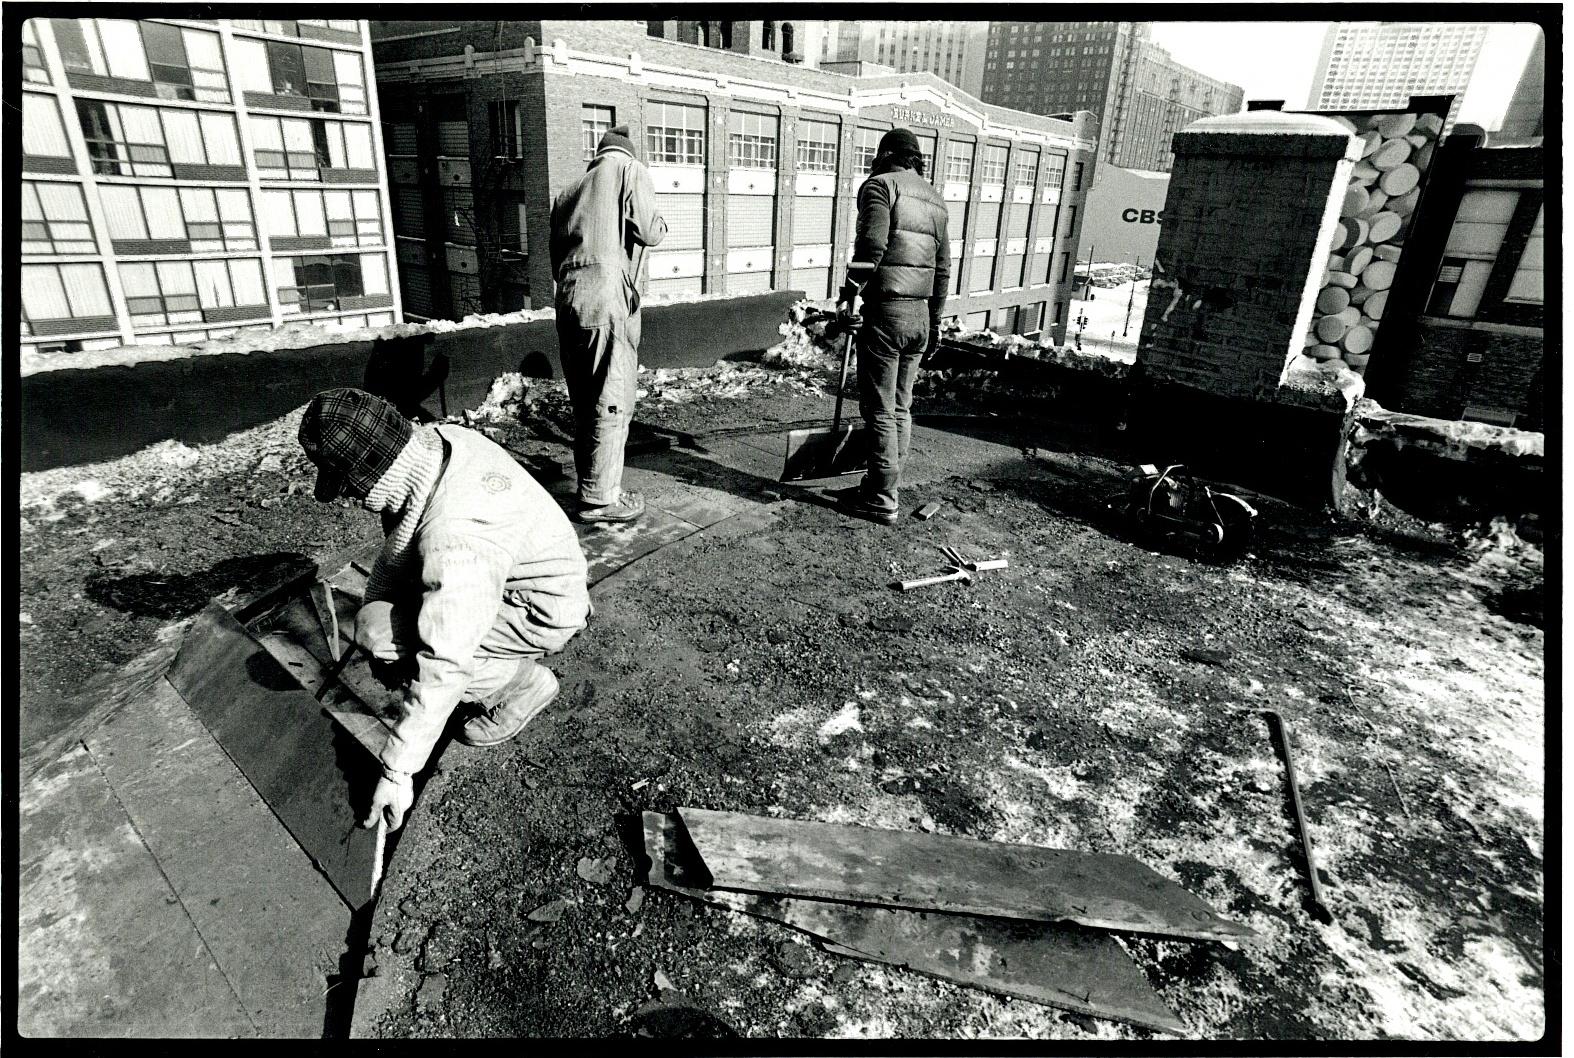 A crew of three people being to remove boards from underneath a top layer of the roof of a building.